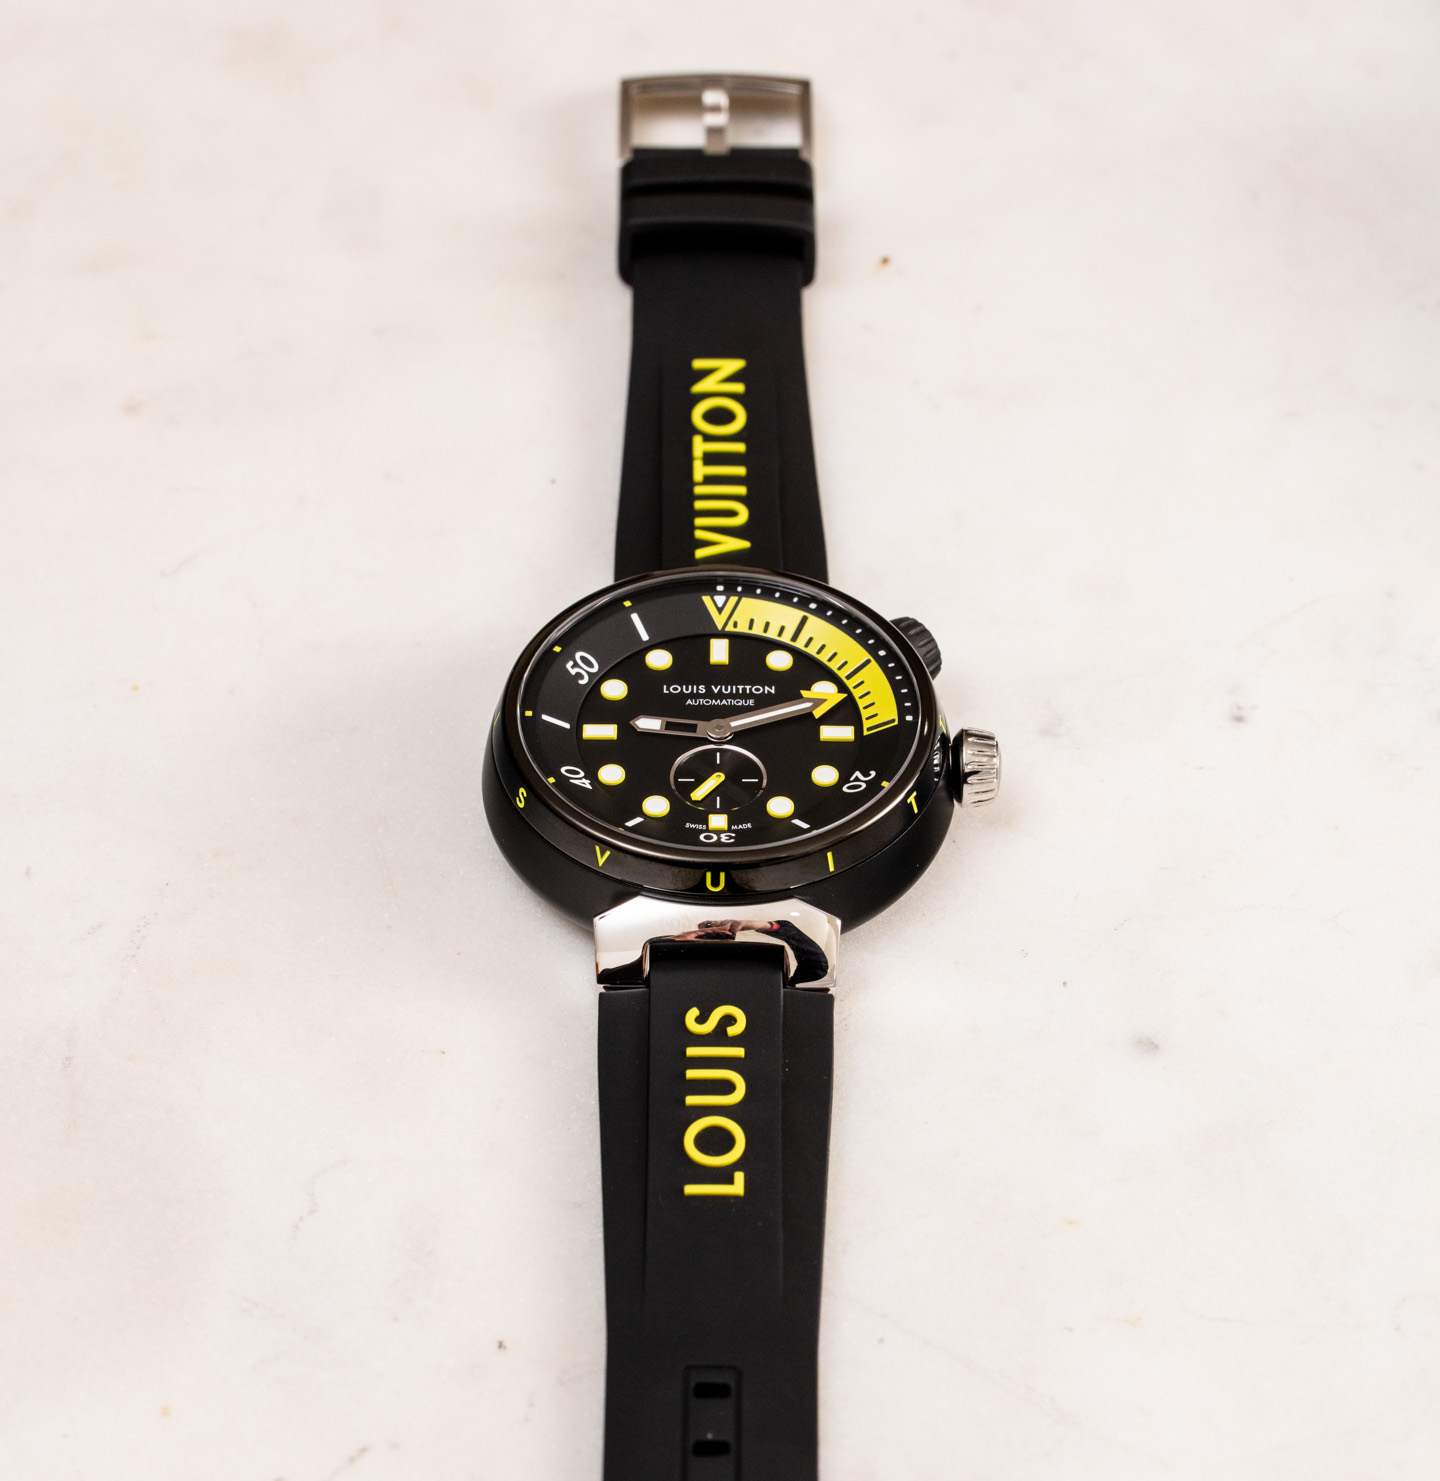 OceanicTime: LOUIS VUITTON Tambour Diver Chronograph for ONLY